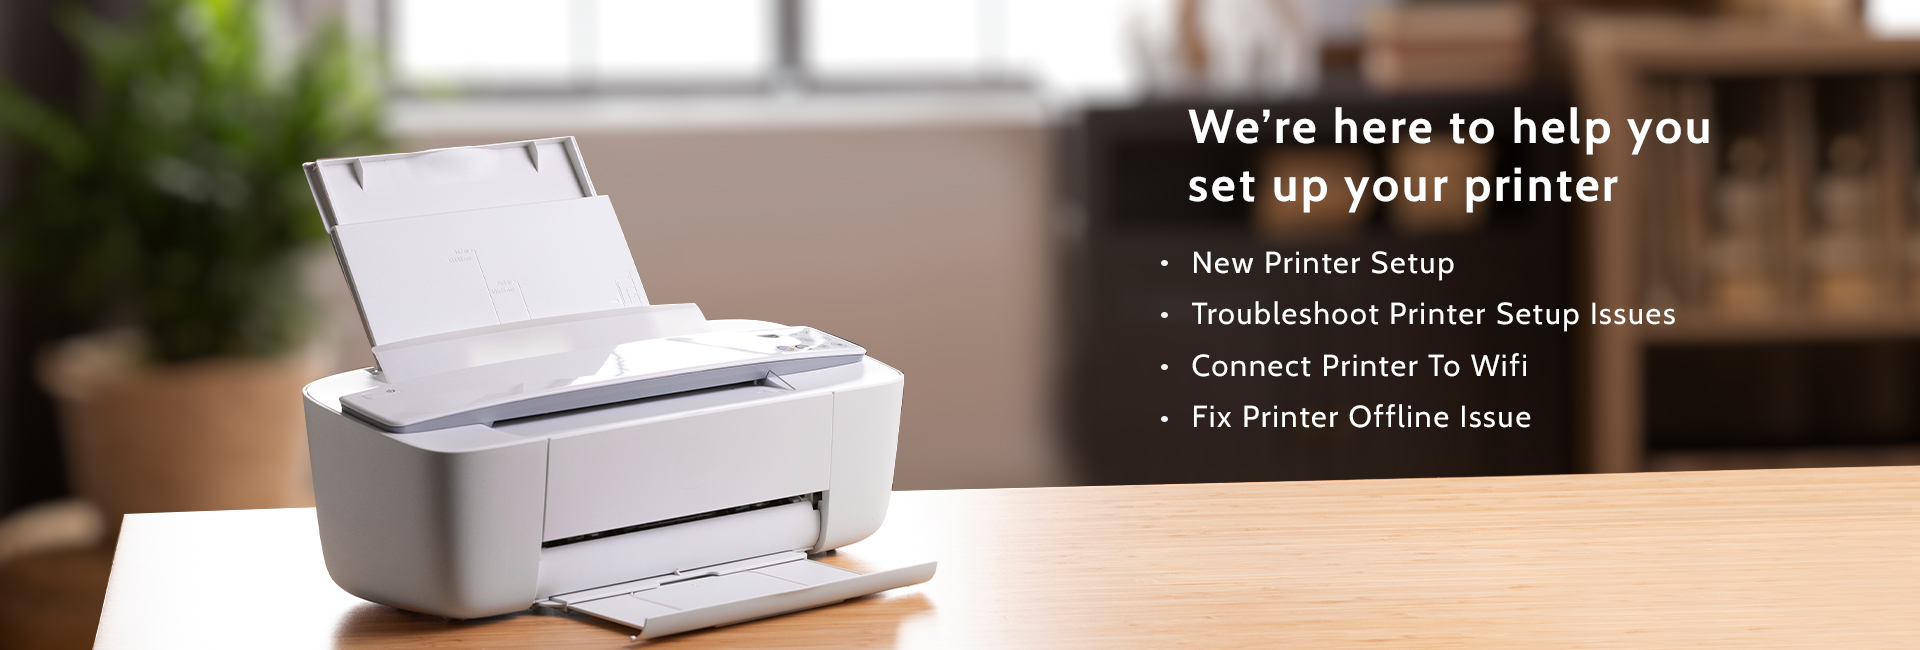 printershut helps you to set up your printer and Printer Problems and Solutions